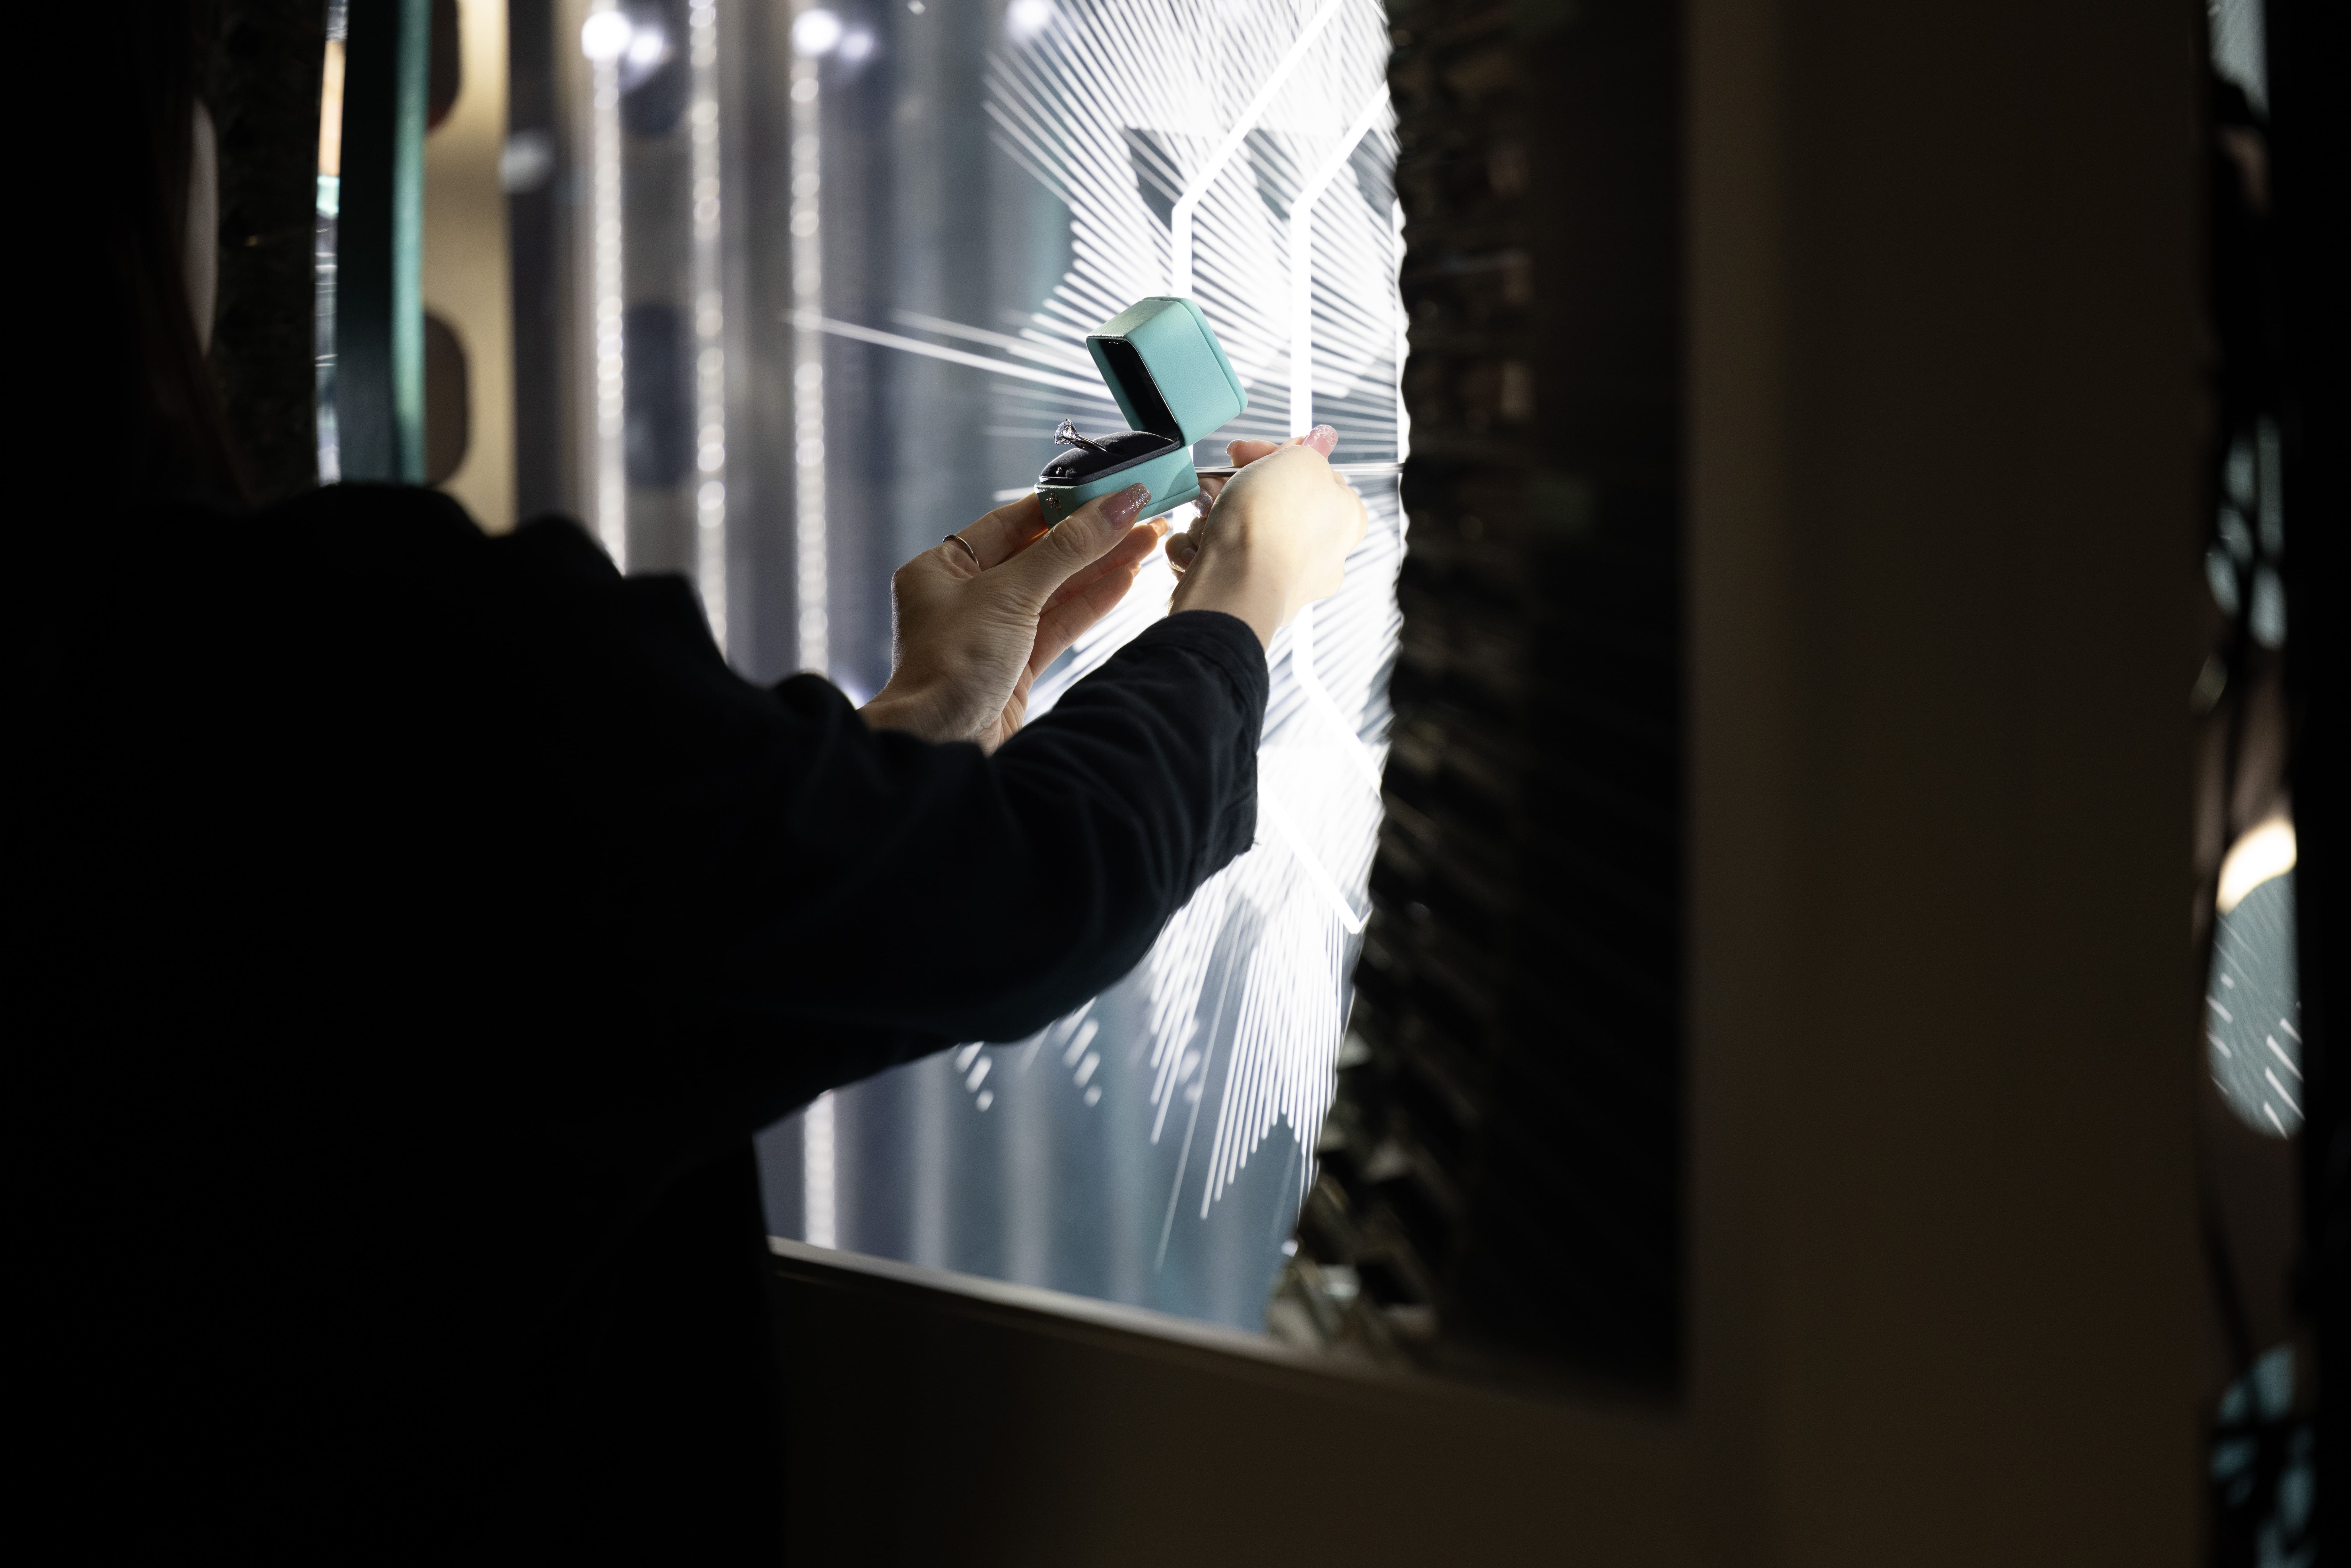 Artisan placing a sparkling Tiffany ring in its box in front of a backlit geometric window display, showcasing intricate light patterns